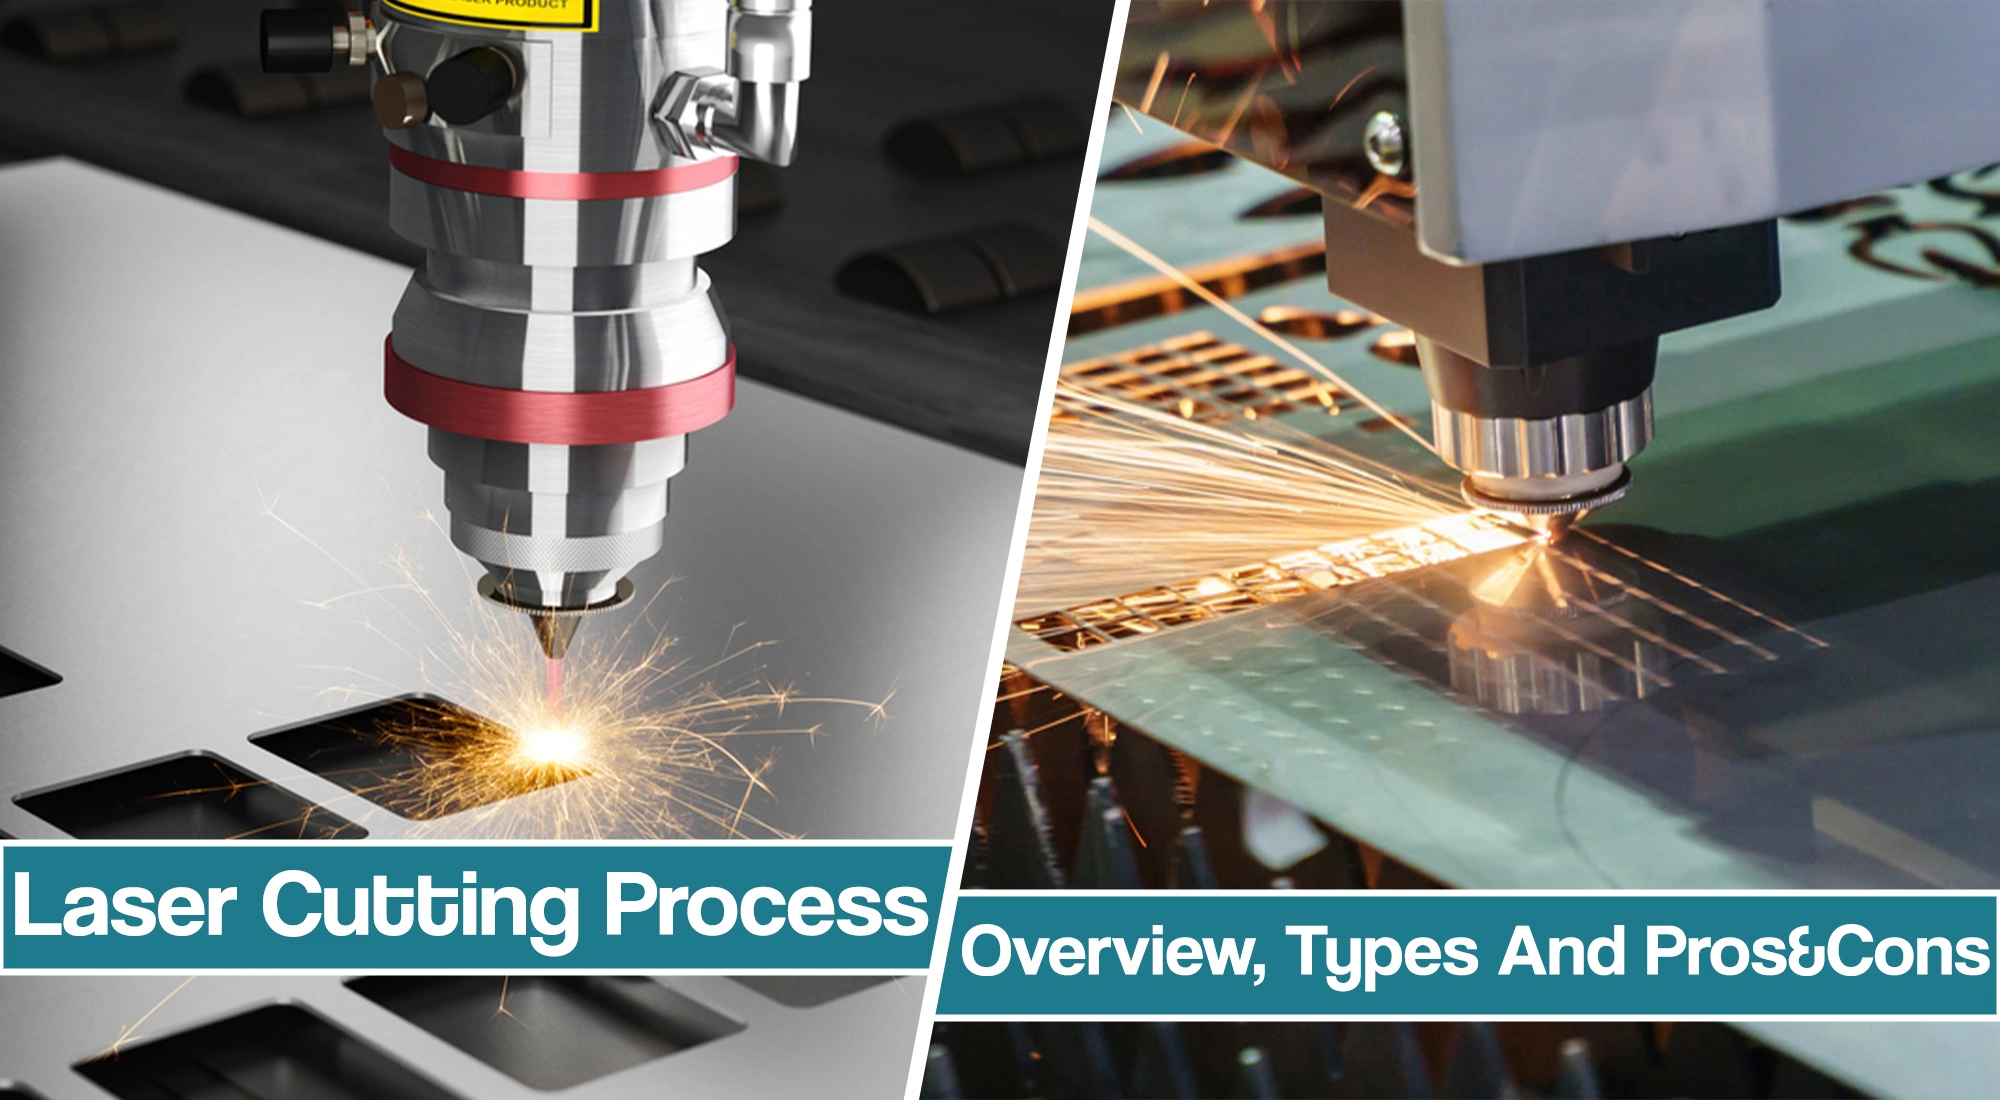 Laser Cutting Process Overview – Types, Methods, and Advantages